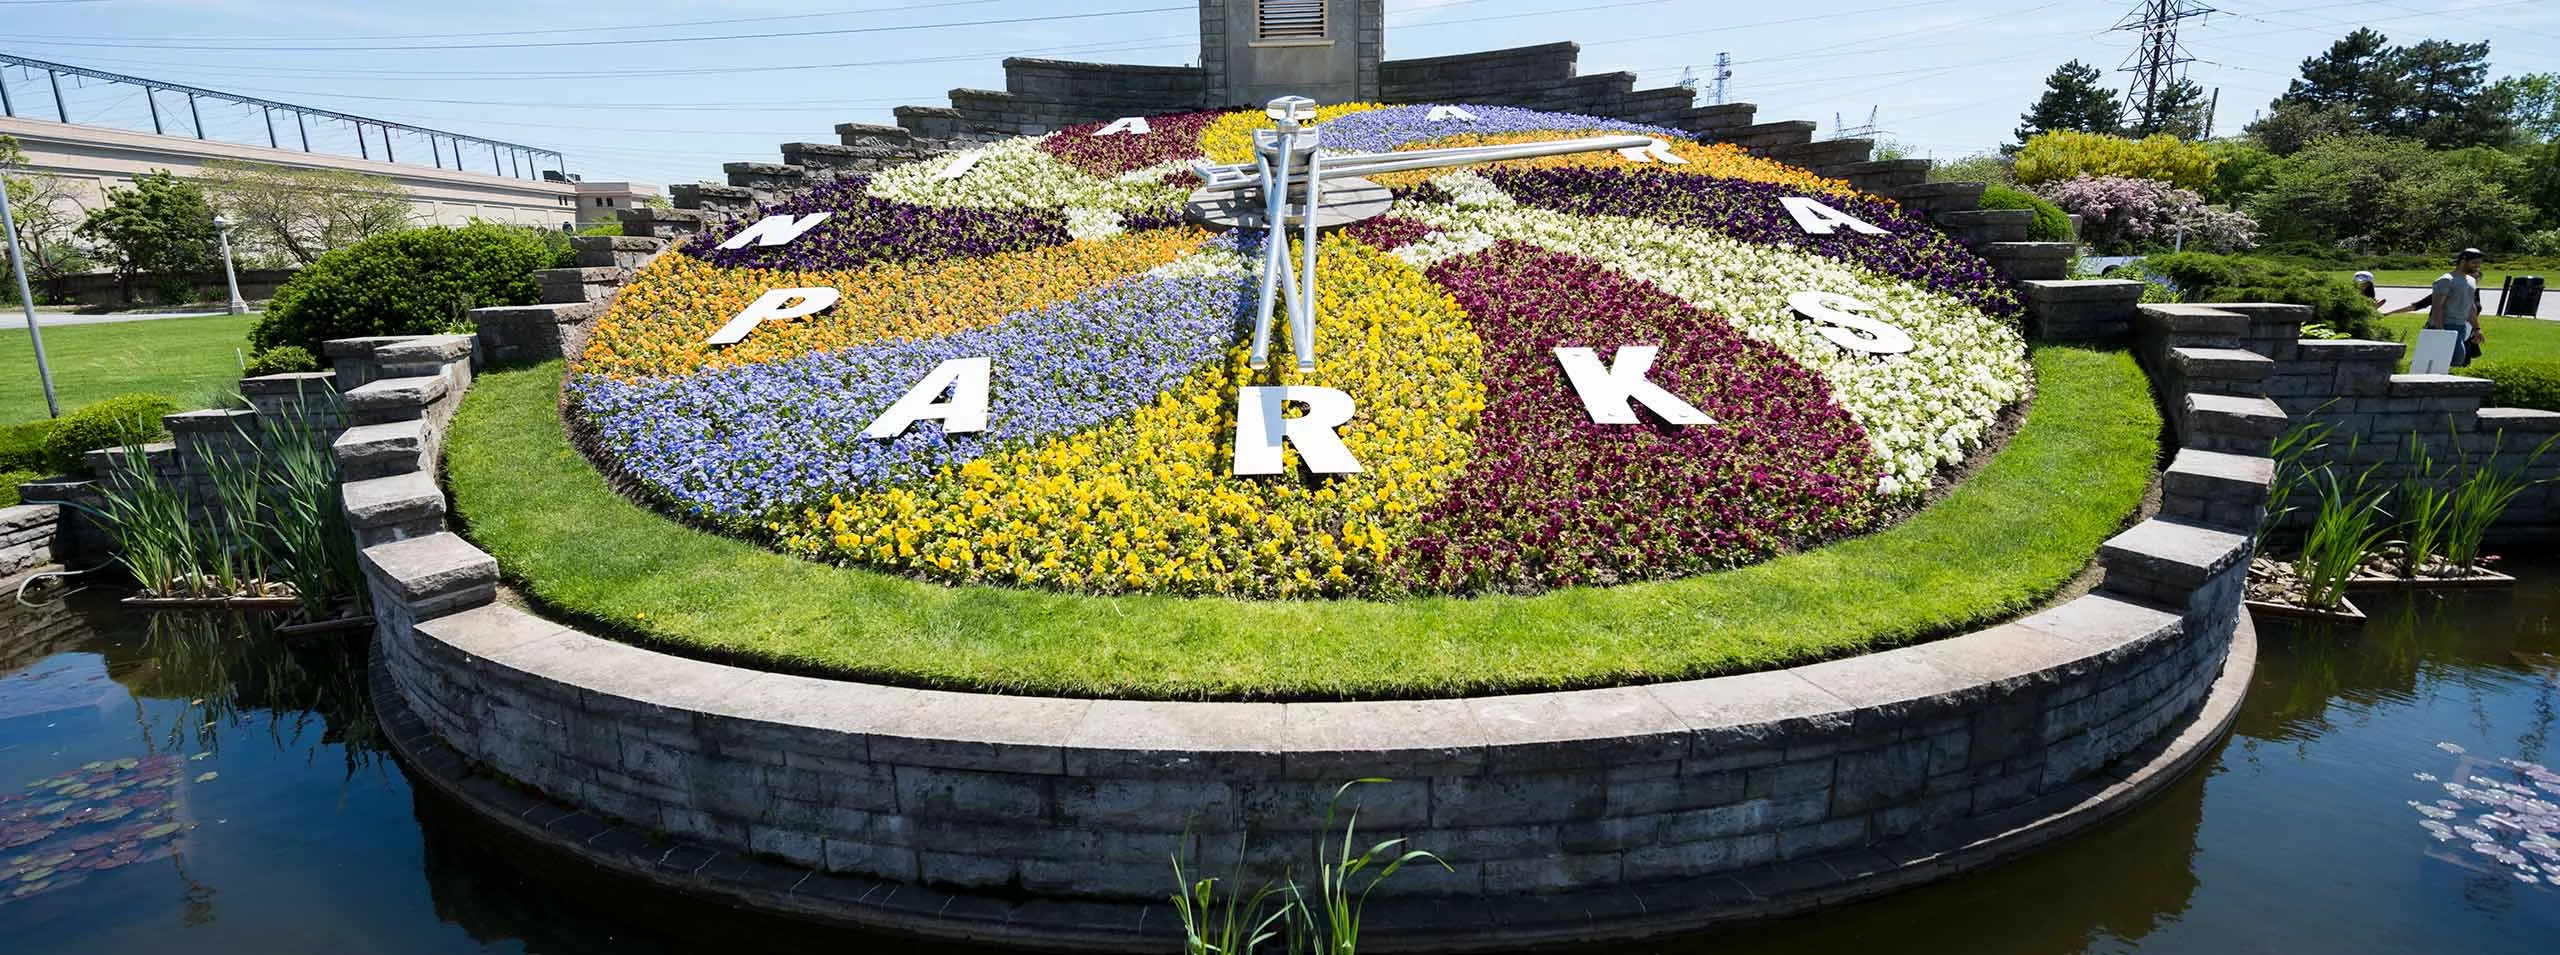 Floral Clock in Canada, North America | Architecture - Rated 3.5